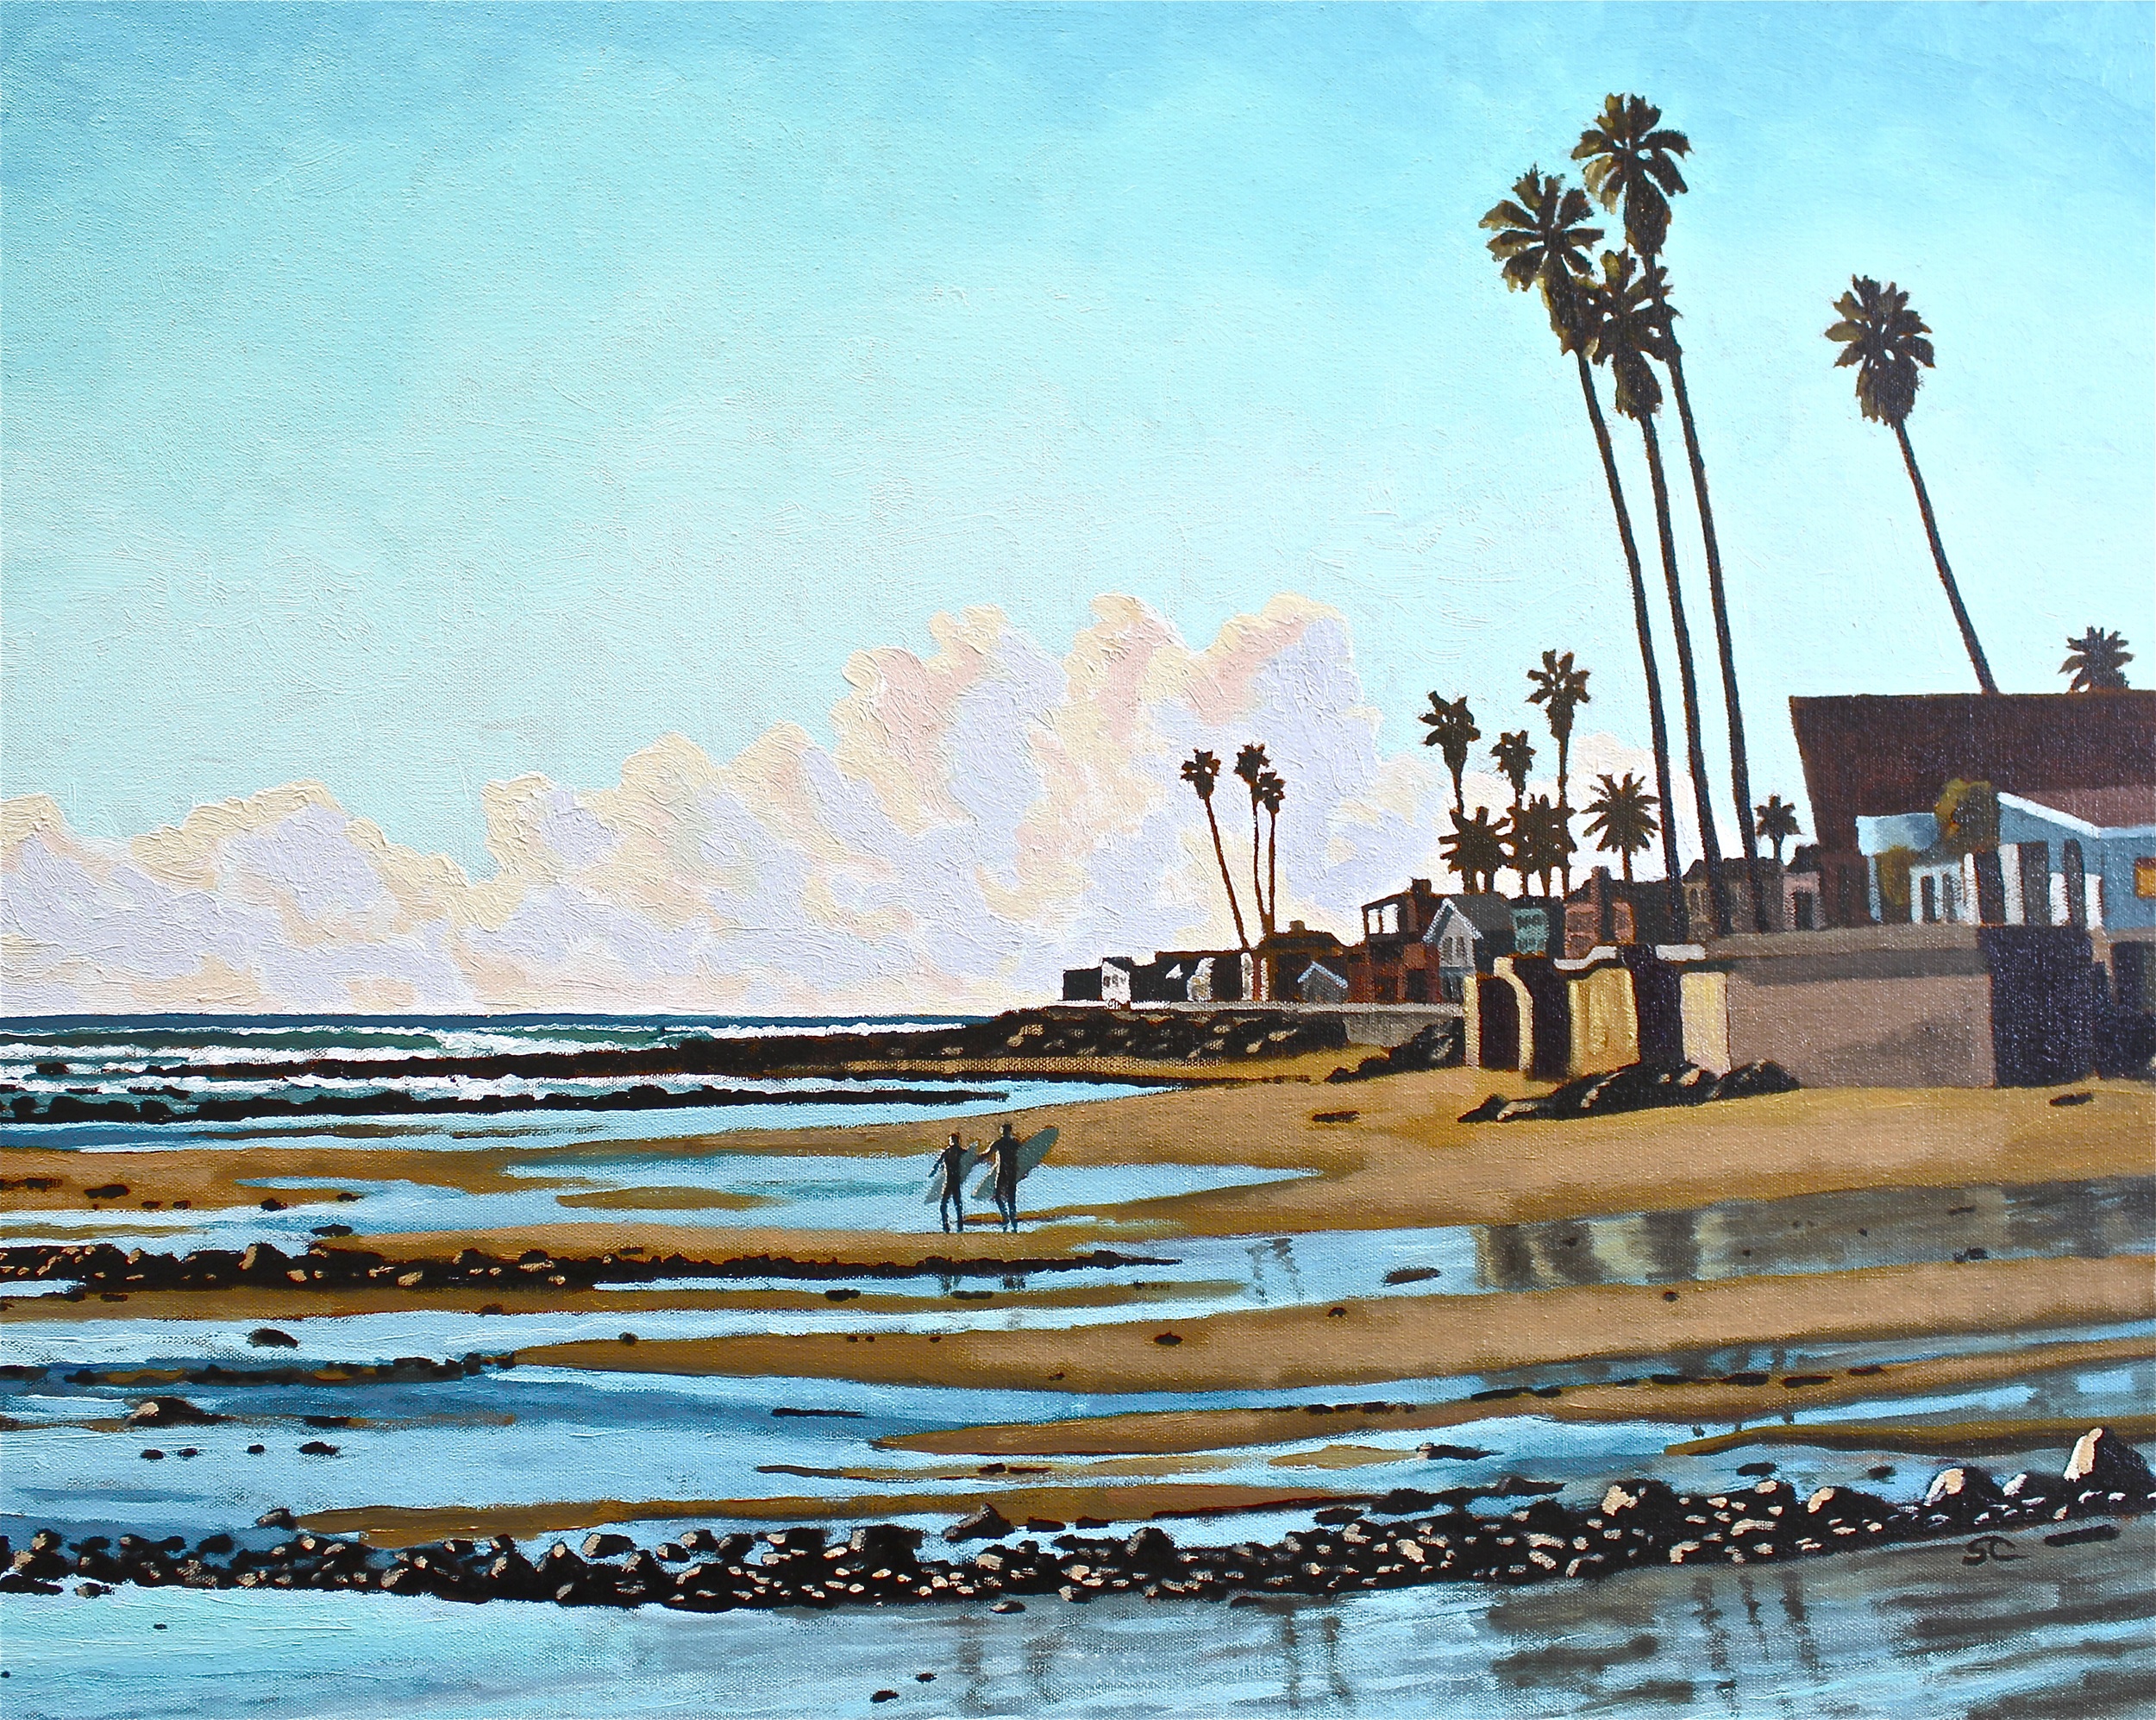 "Walking Down for a Low Tide Session" oil on canvas 24 x 30, sold